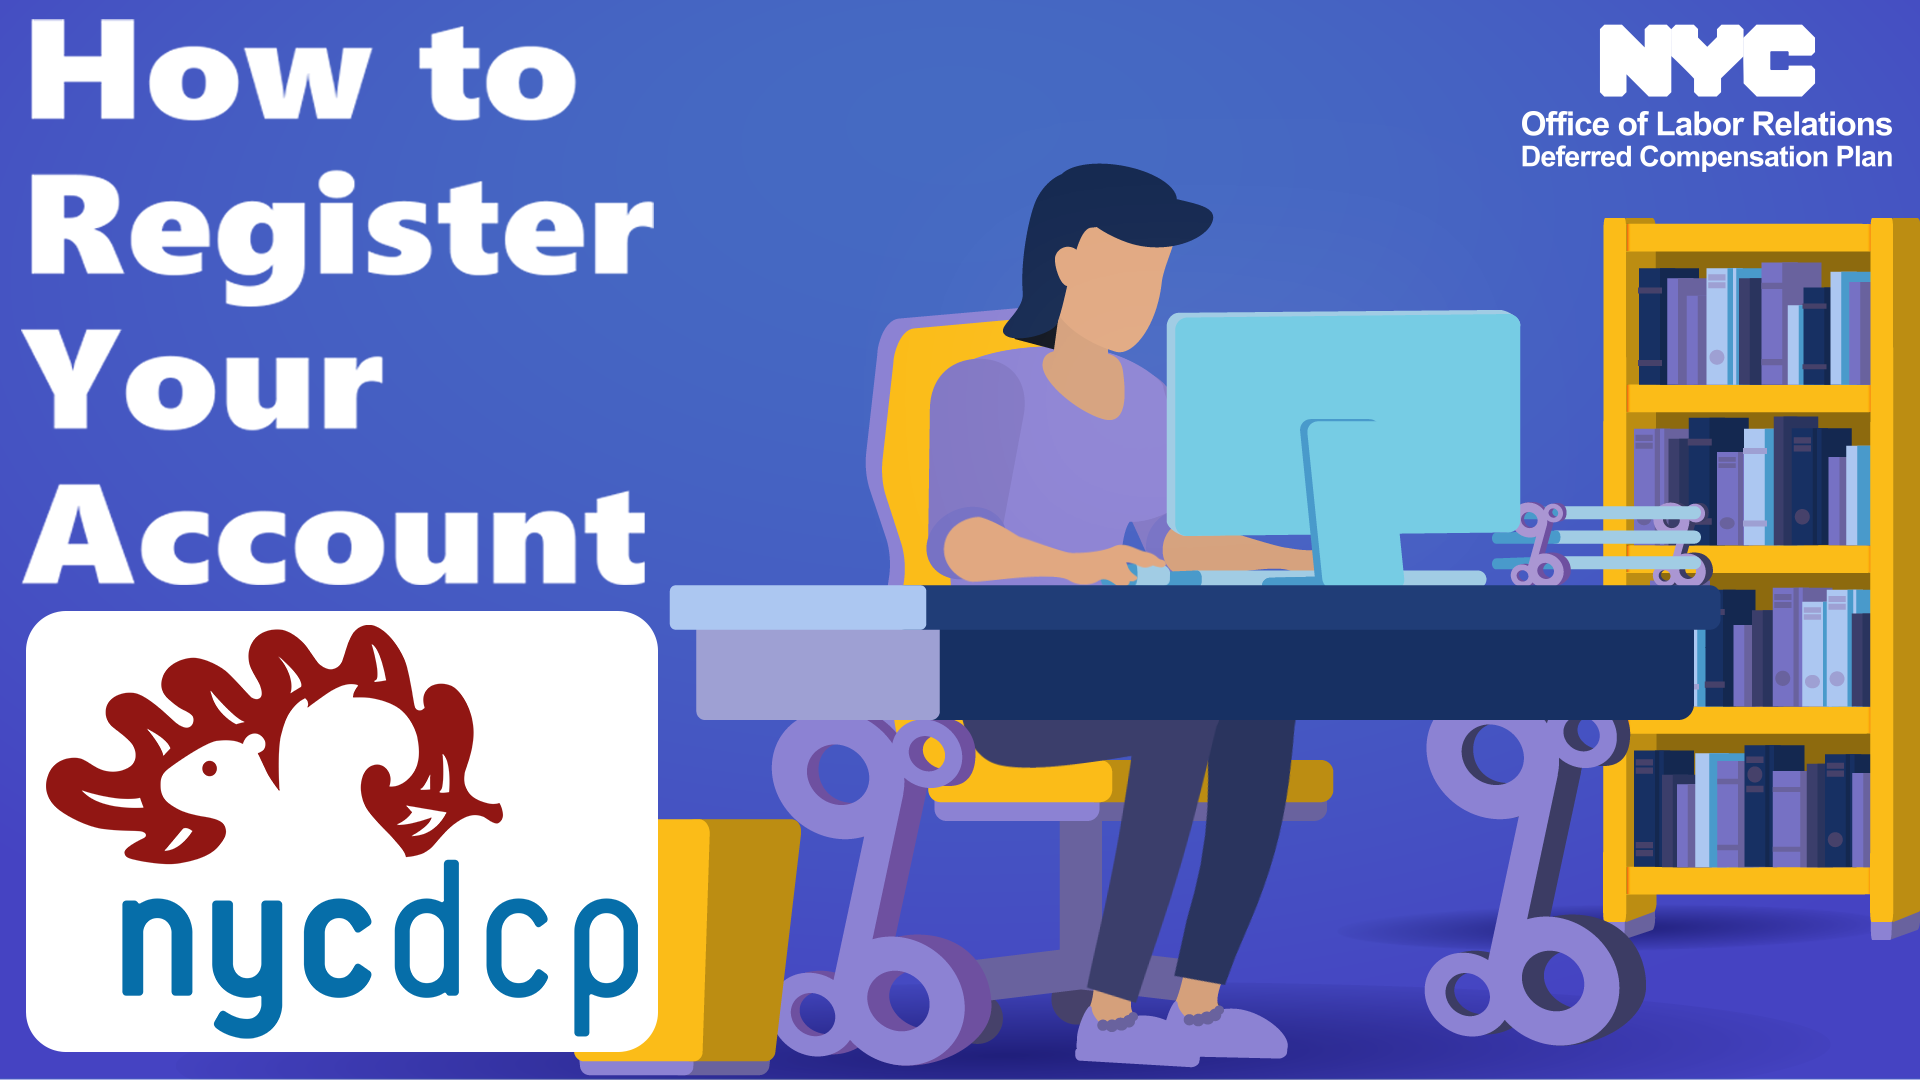 Watch the "How to Register Your Account" video